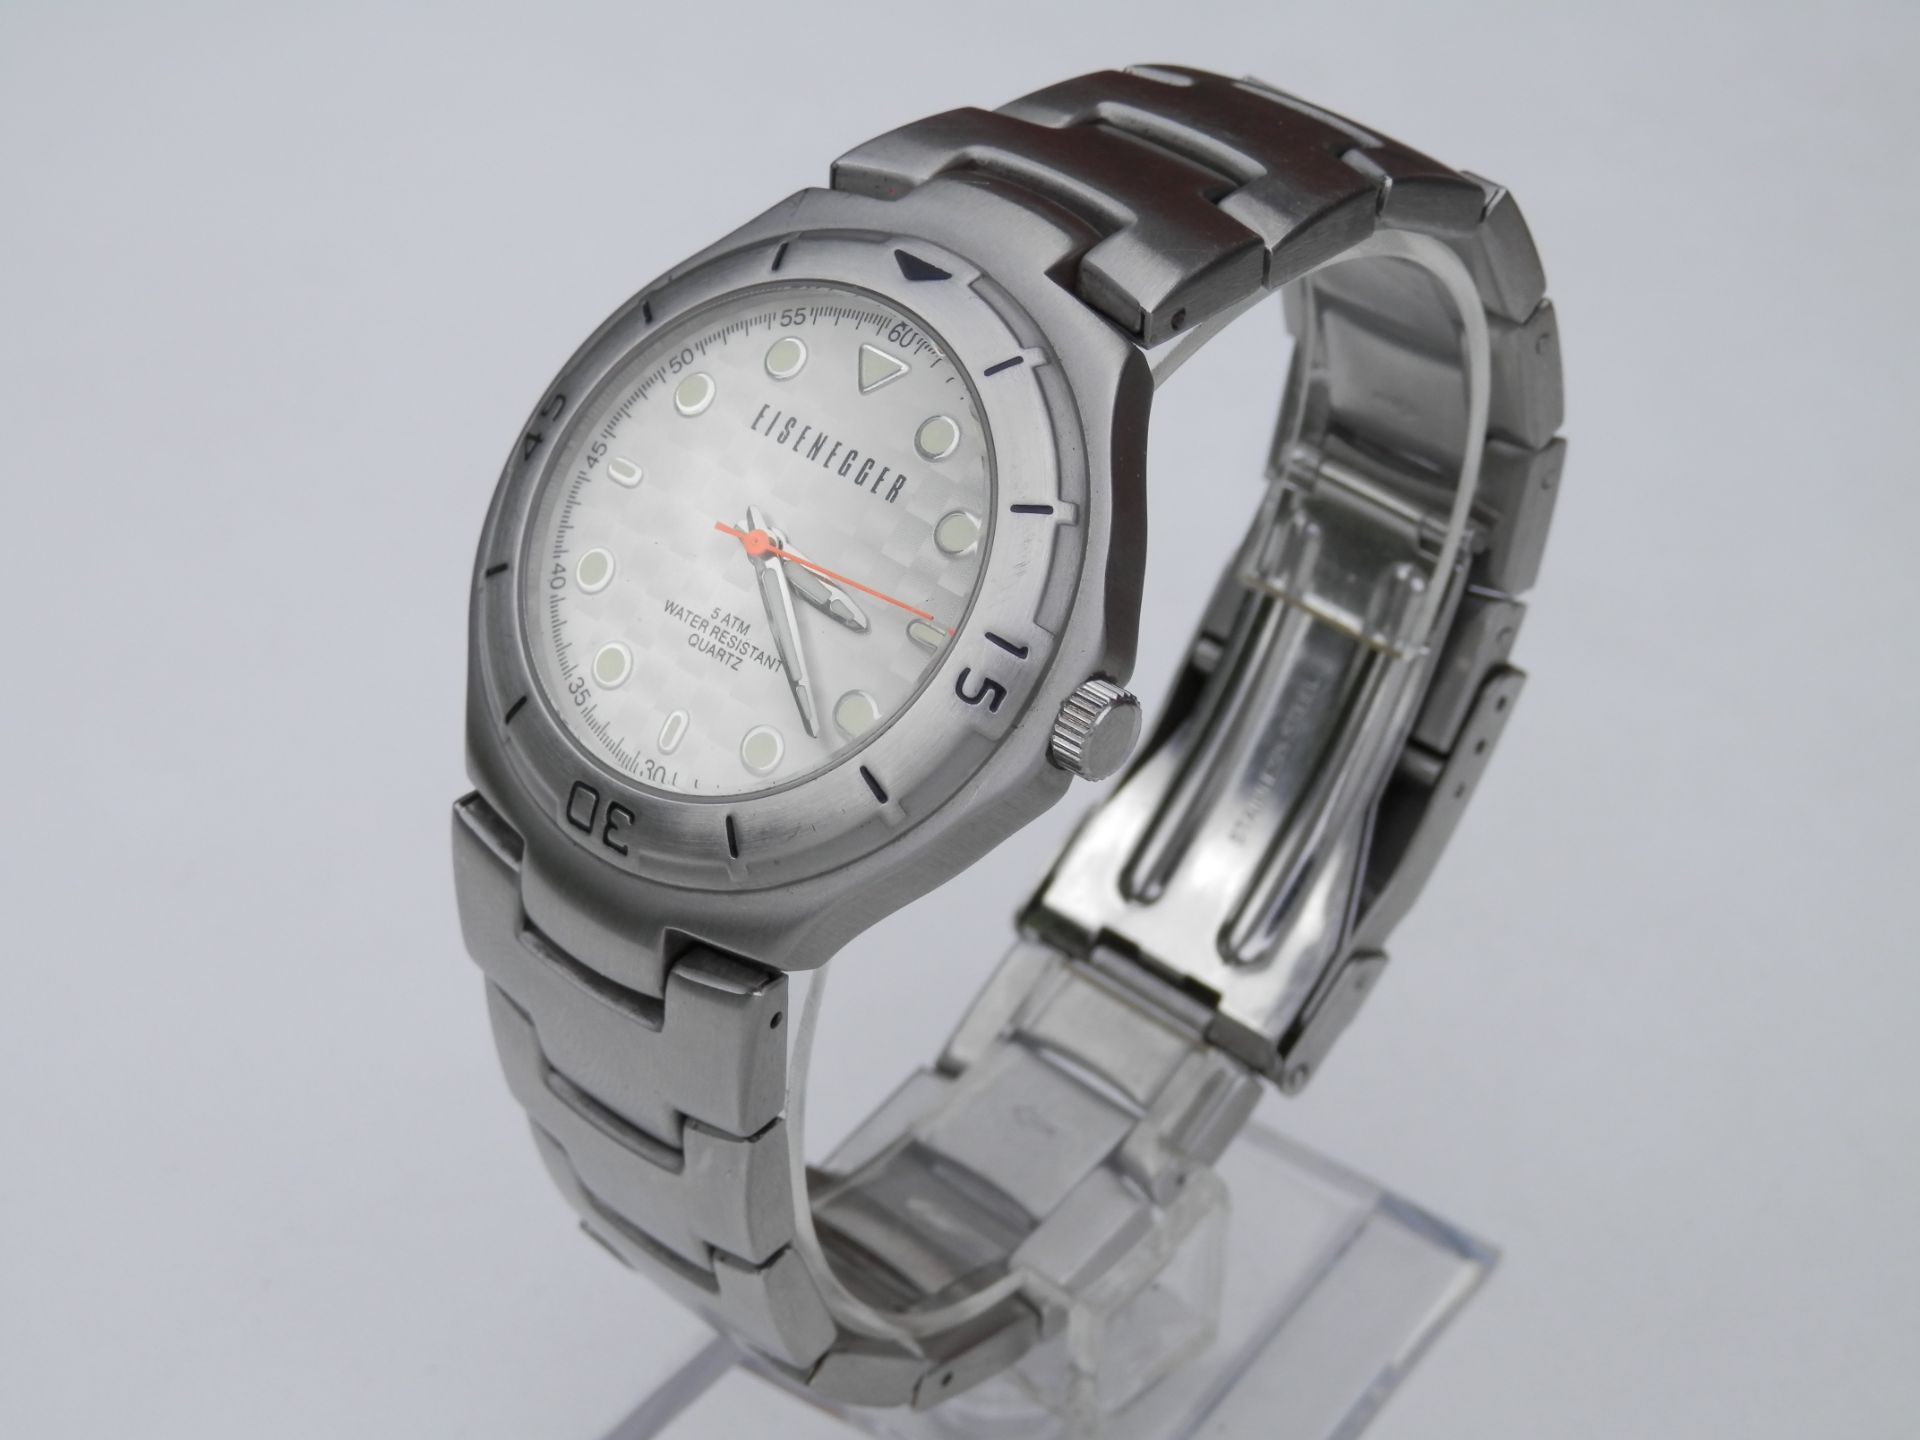 HEAVY FULL STAINLESS EISENEGGER 42MM QUARTZ 5ATM WR WATCH, WITH 8" STRAP. RRP £95 - Image 2 of 9